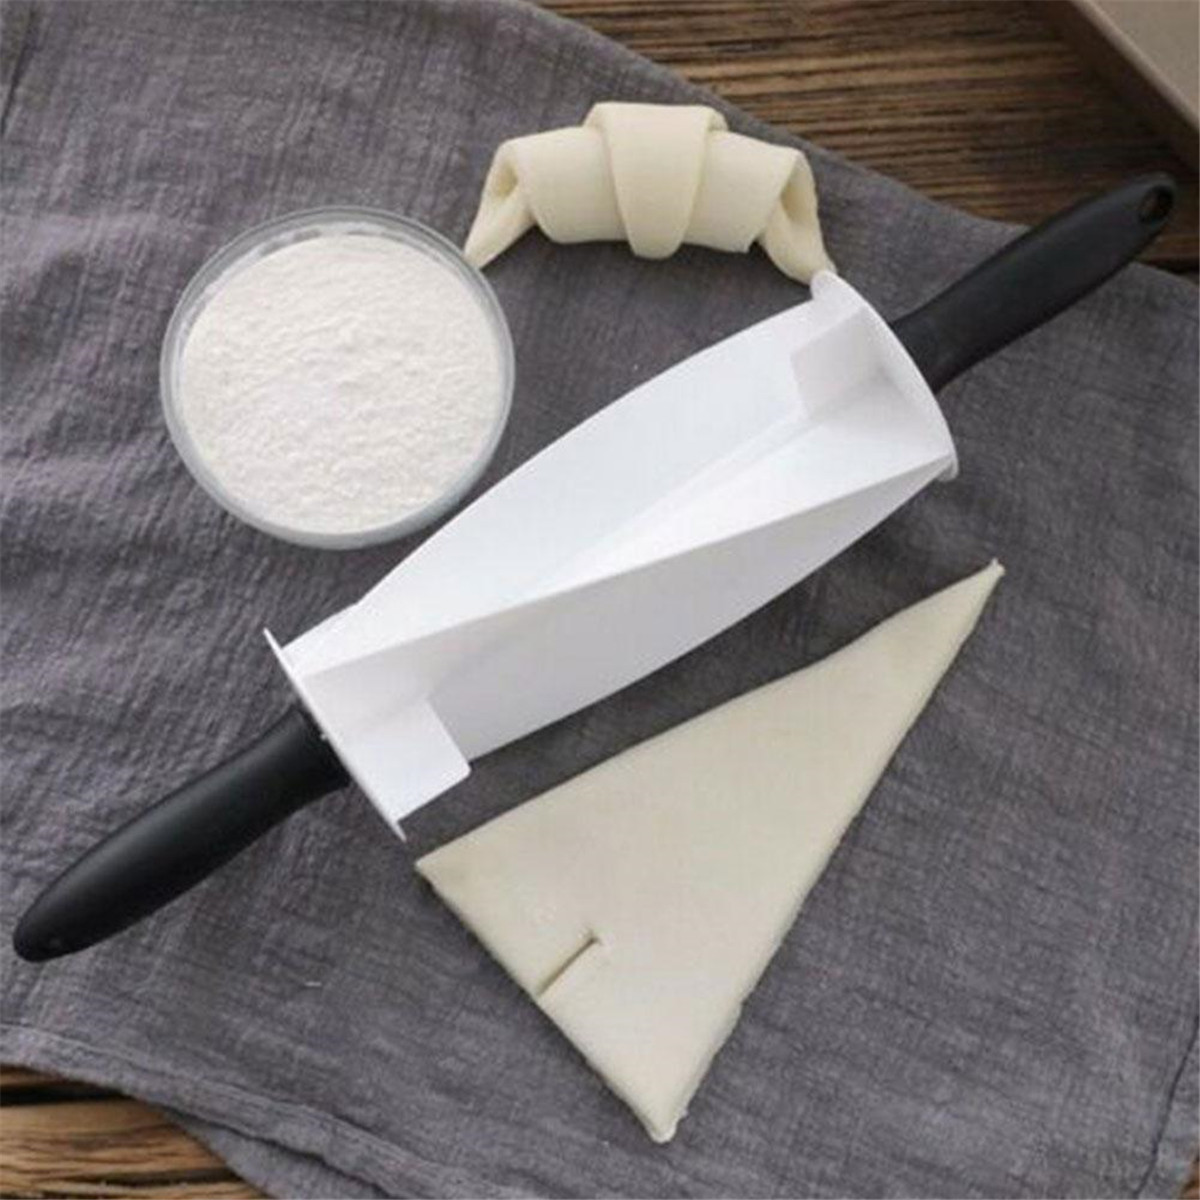 Croissant-Bread-Dough-Cutter-Rolling-Pin-Pastry-Baking-Roller-Home-Kitchen-Tools-1614814